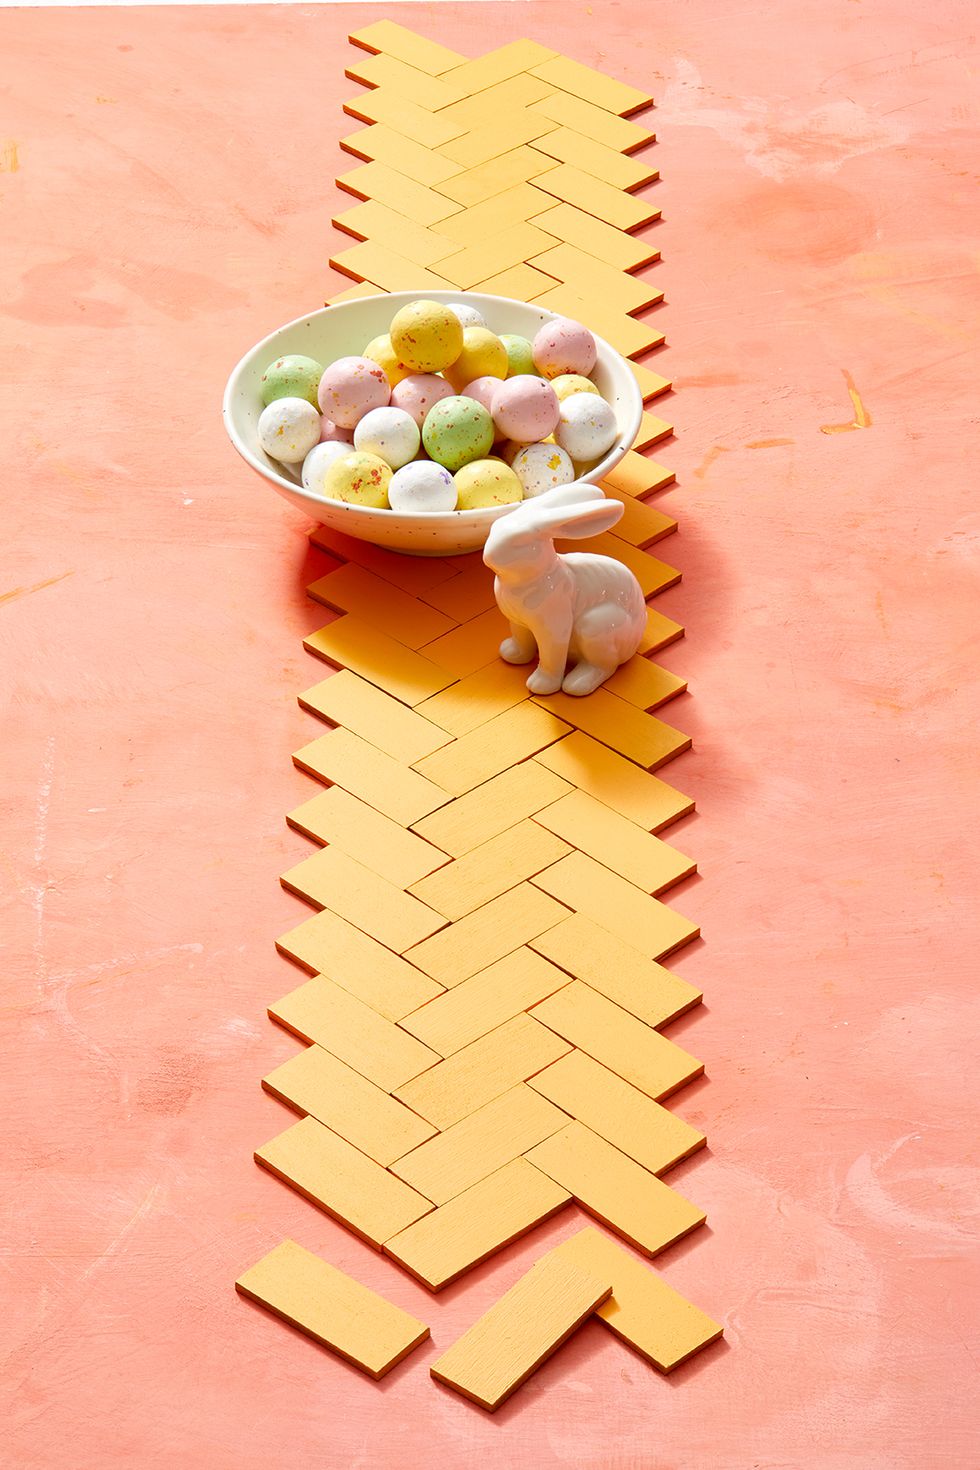 8 Best-Selling Easter Decorations to Shop From